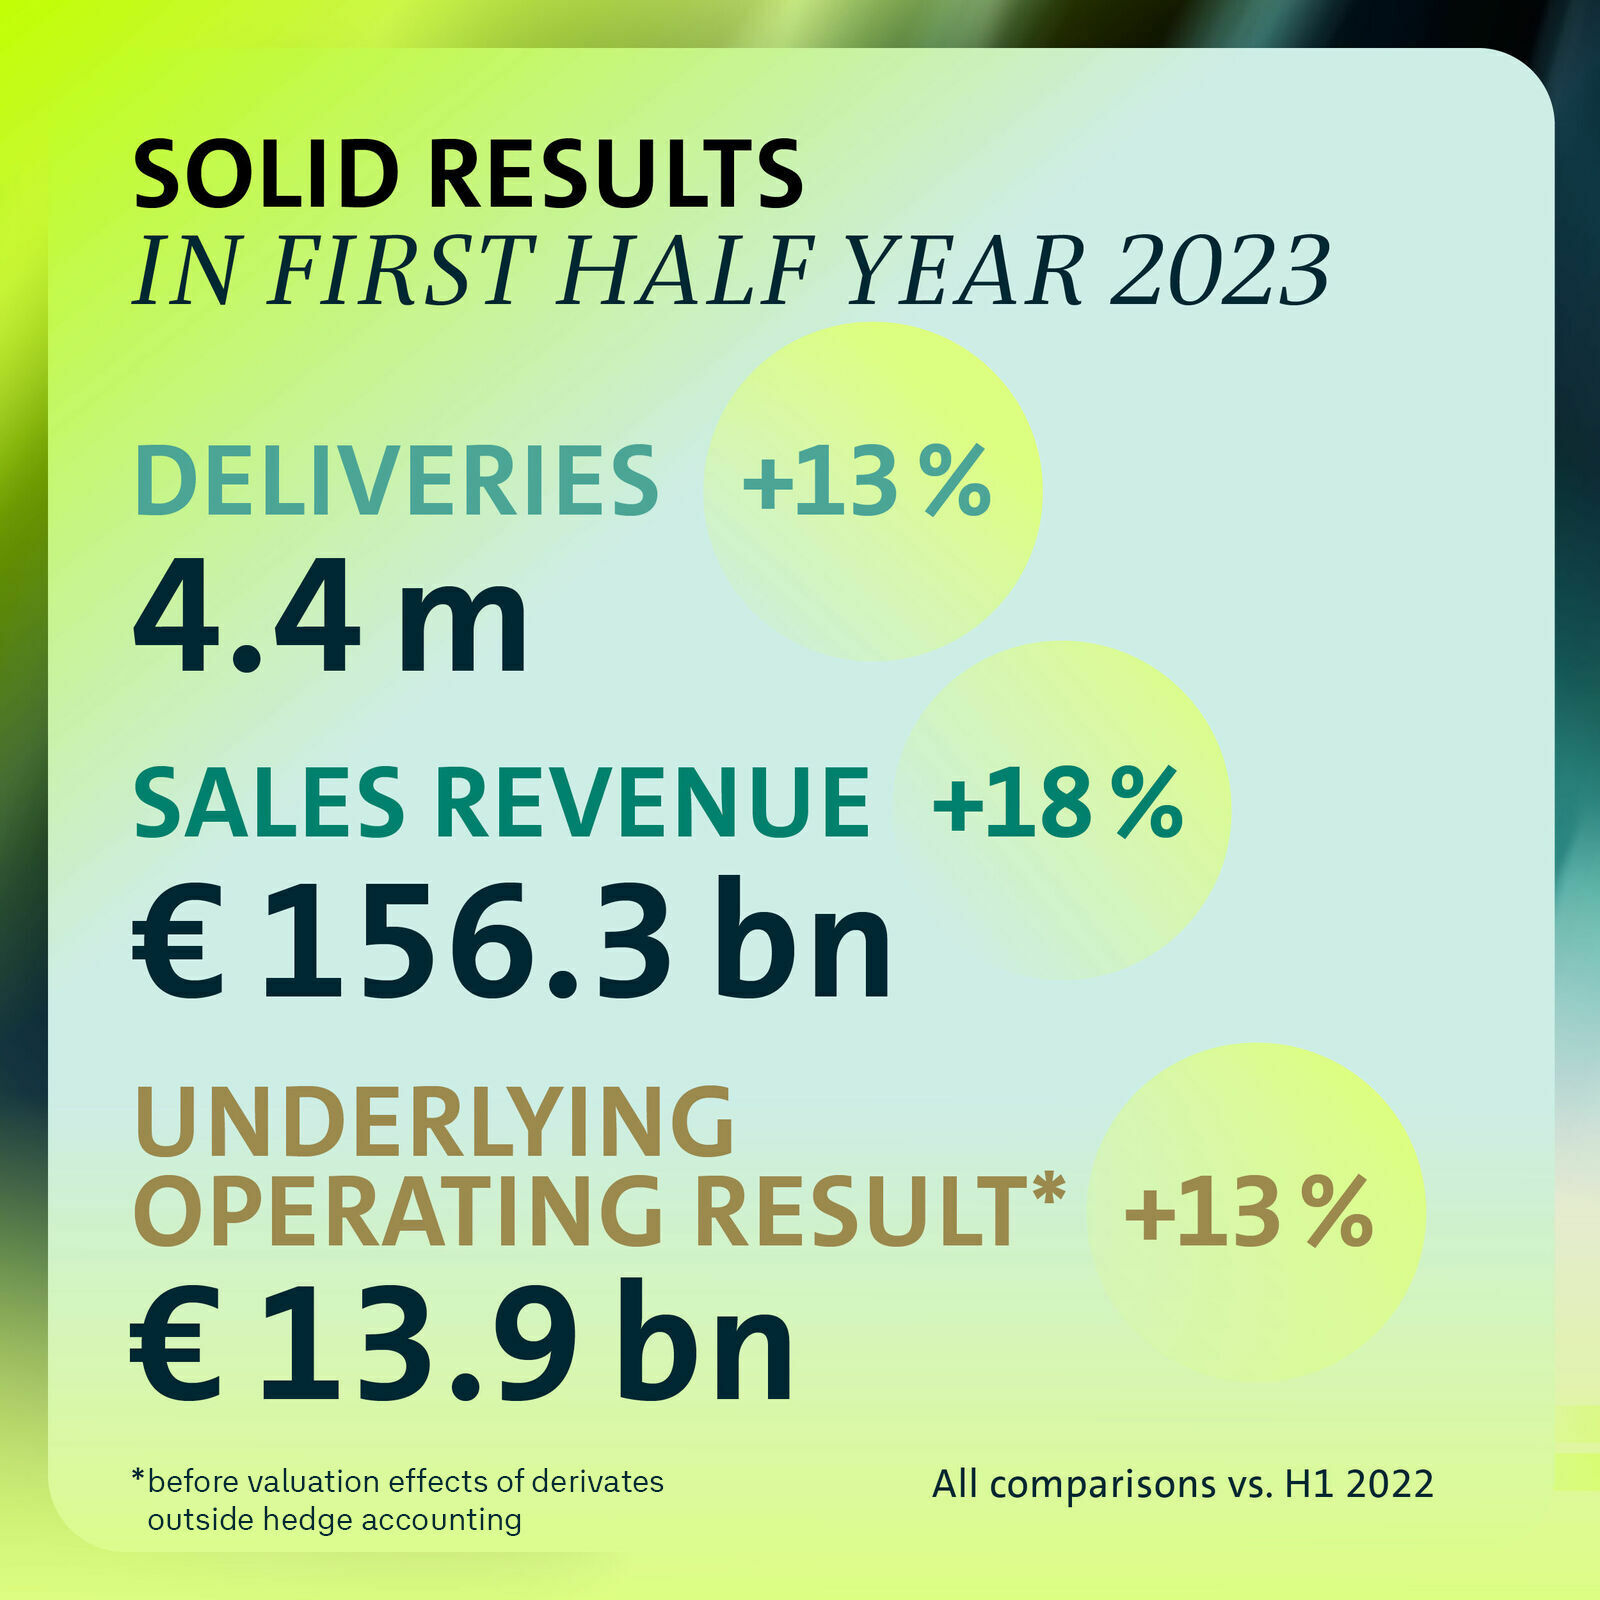 Solid results in first half year 2023